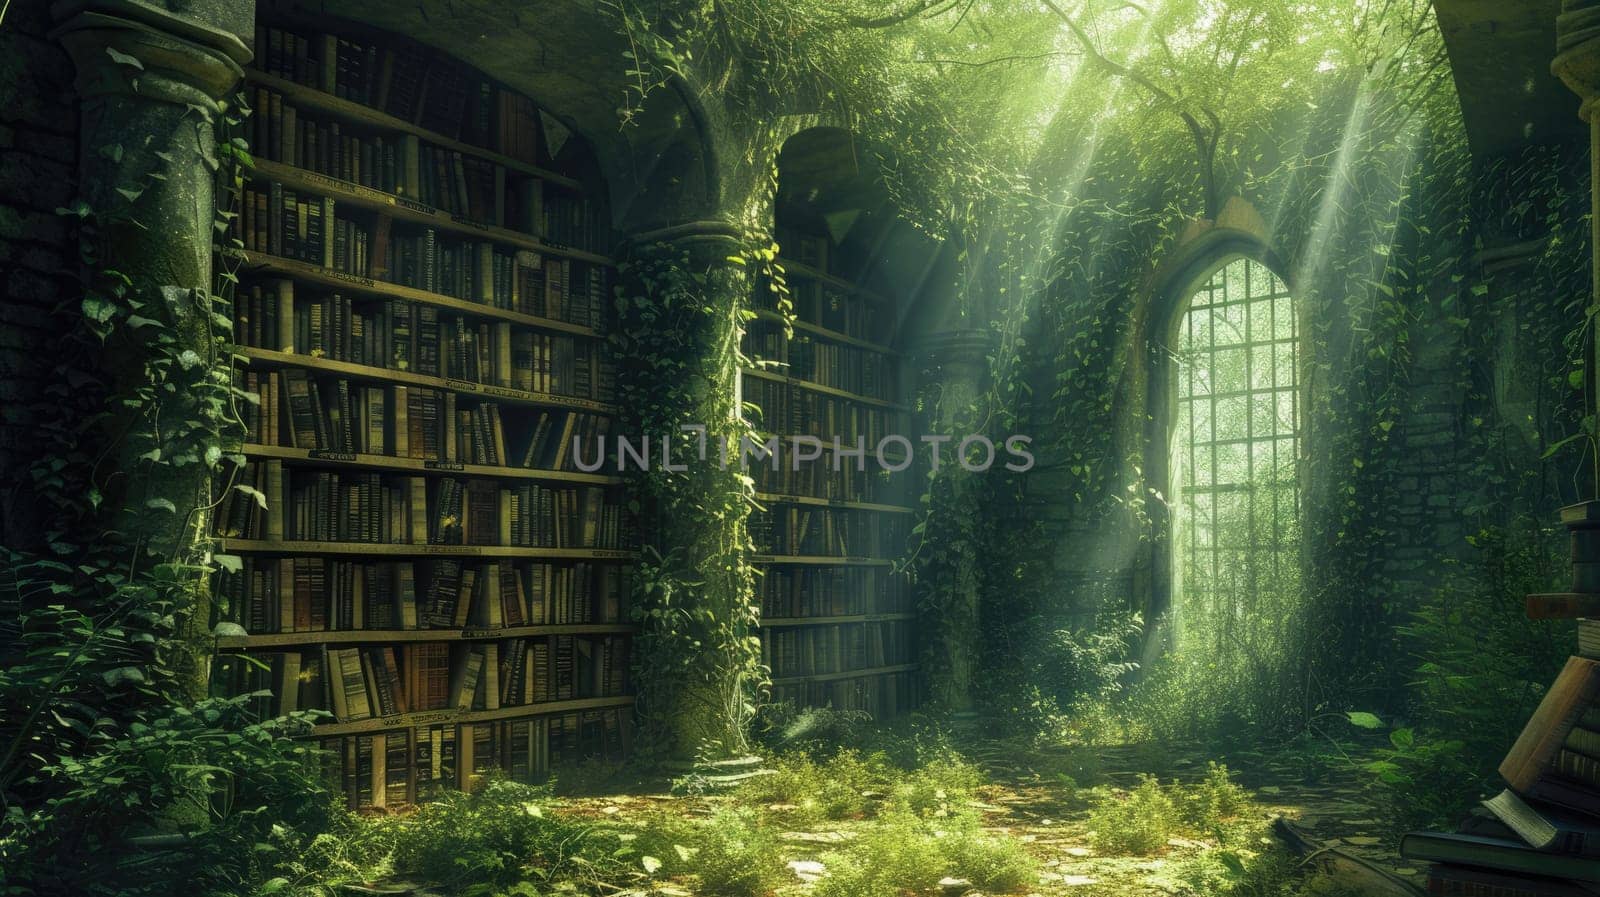 An ancient library in a hidden forest, overgrown with ivy, books. Resplendent. by biancoblue